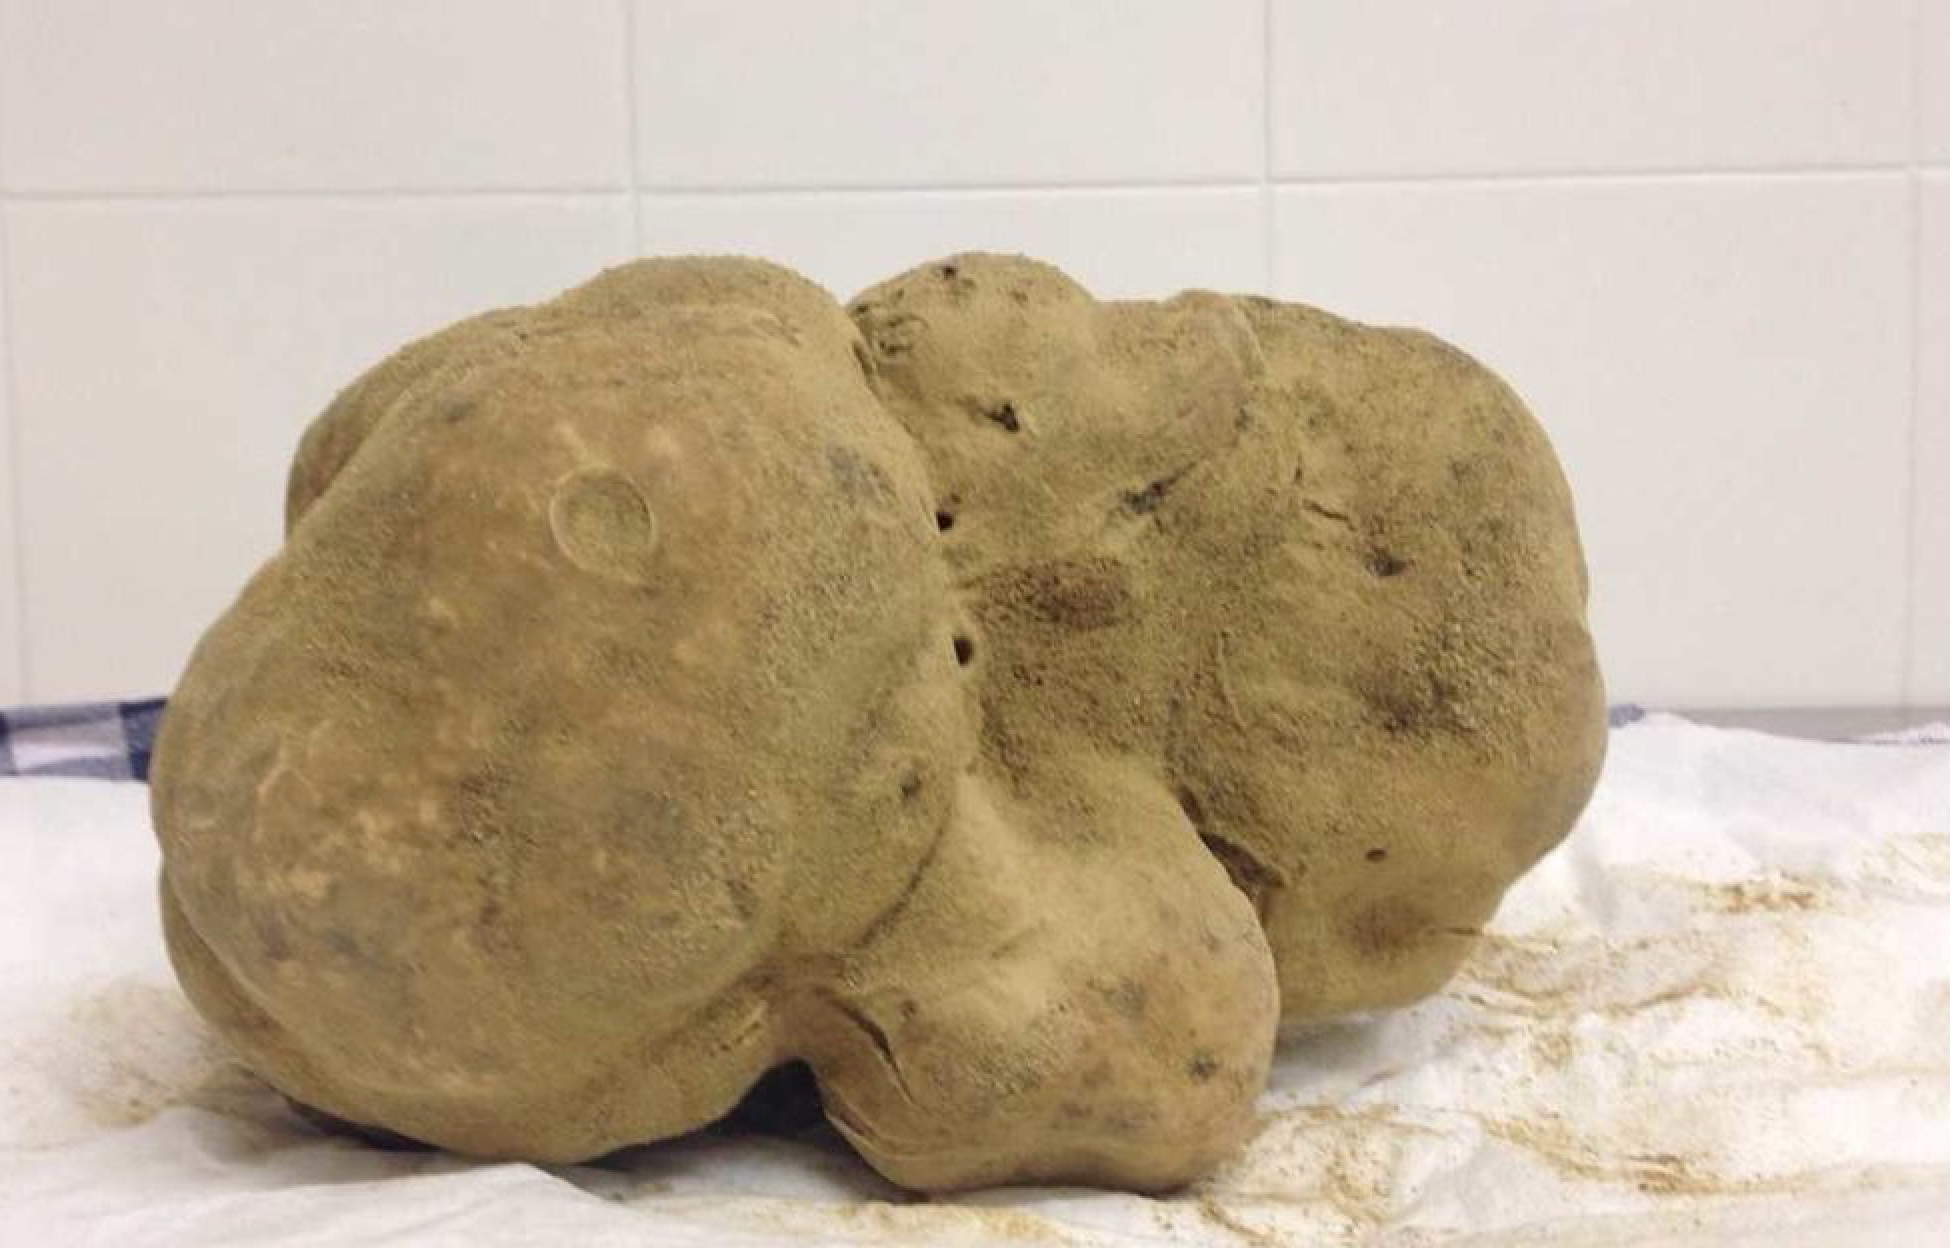 Largest truffle ever found